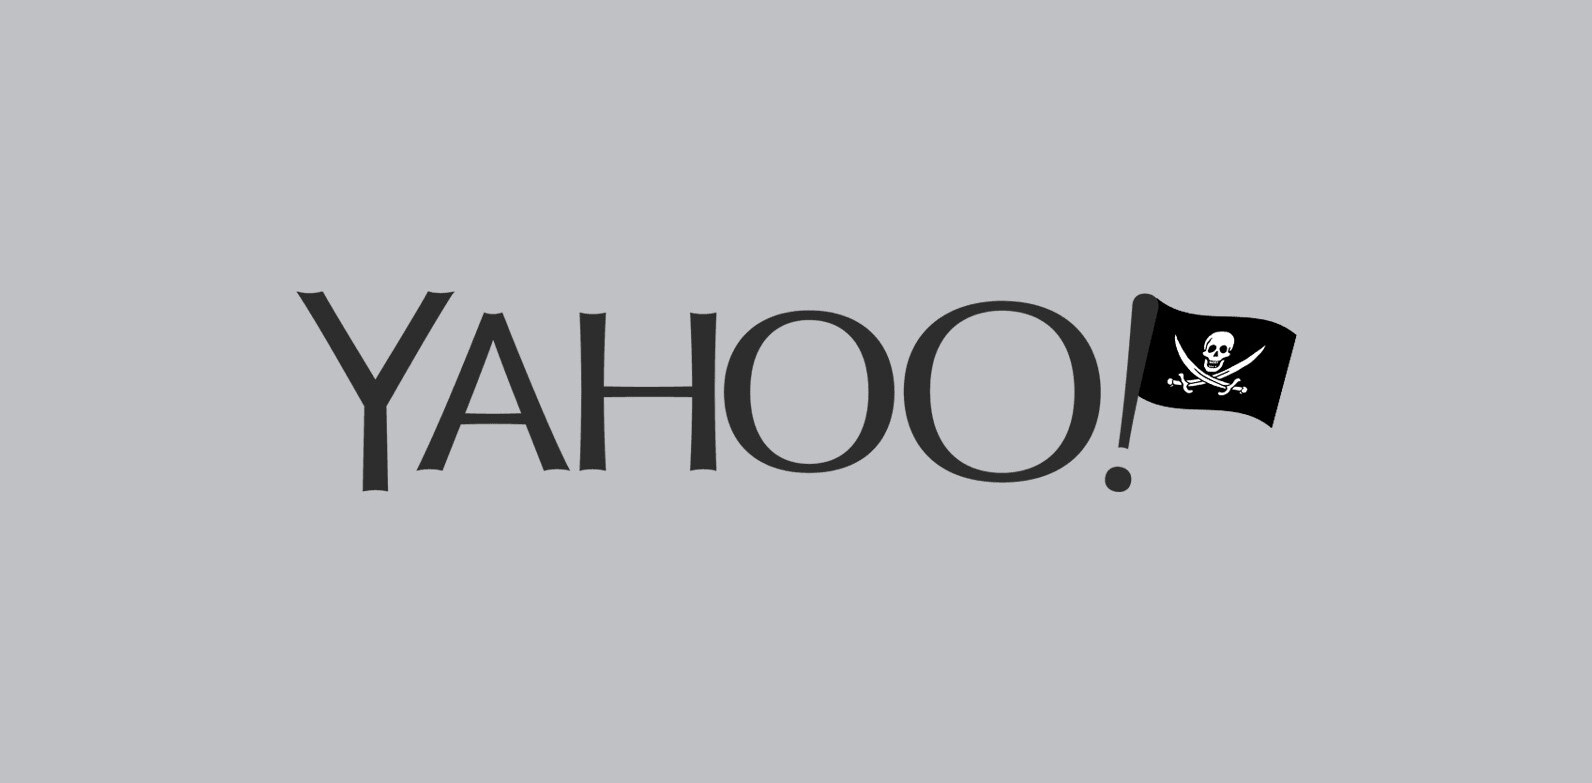 Yahoo engineer hacked 6,000 accounts in search of nudes